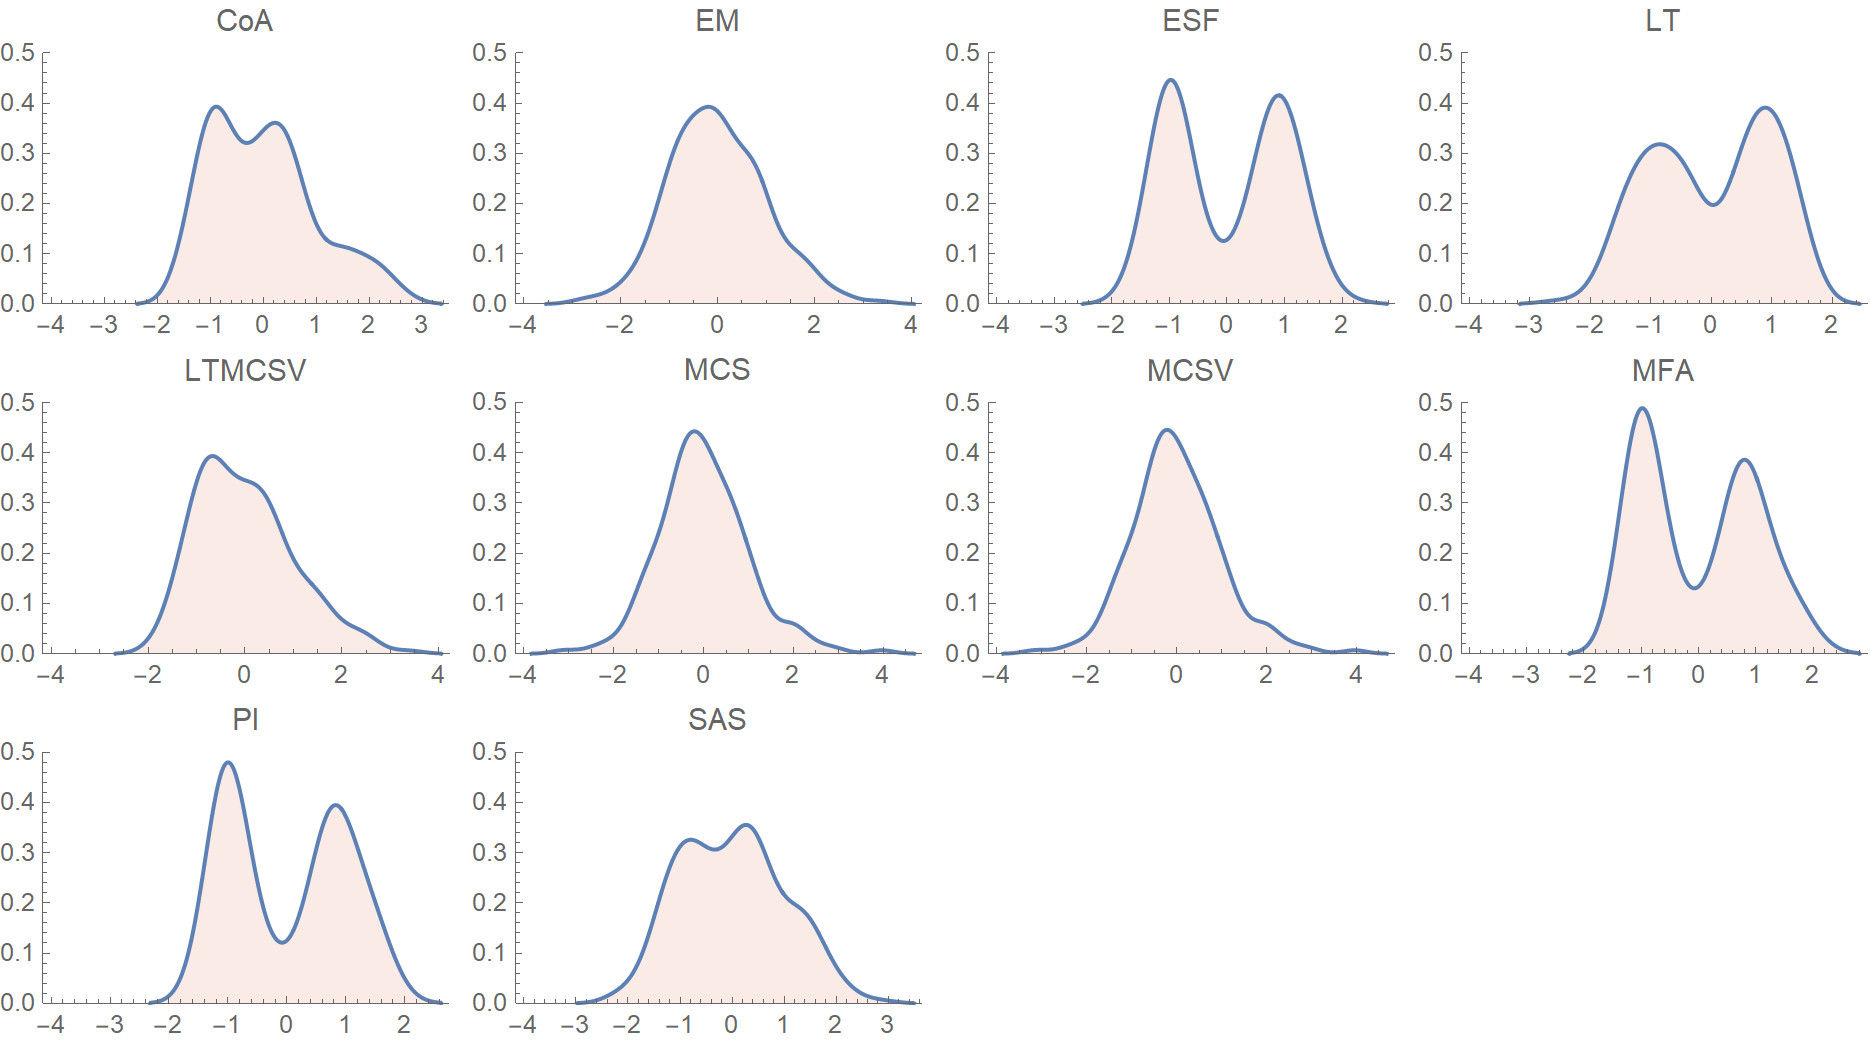 Probability density function distributions for the various complexity metrics. The data have been normalized by subtracting the mean and dividing by the standard deviation.